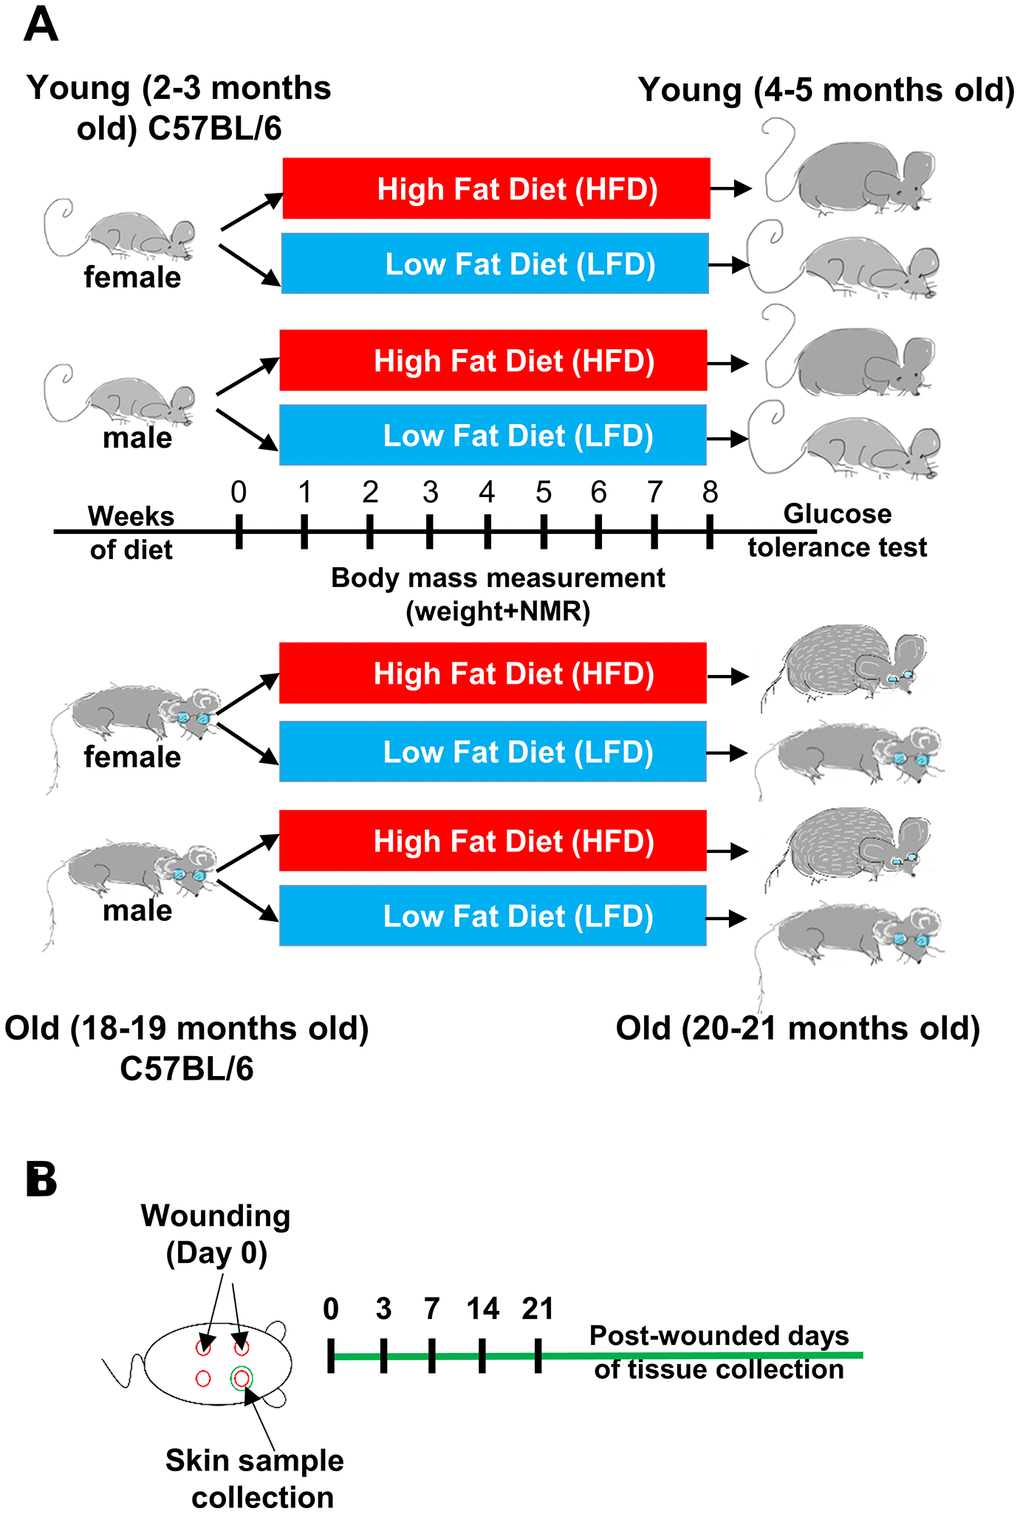 Scheme of the experimental design. (A) Young (2-3 months old) female (n=48) and male (n=48), and old (18-19 months old) female (n=48) and male (n=48) C57BL/6 (B6) mice were fed for 8 weeks on either LFD or HFD. (B) Mice were injured at day 0. Skin tissues were collected at day 0 (uninjured control) and post-wounded days: 3, 7, 14 and 21, n=4-6 mice per time point/per group.